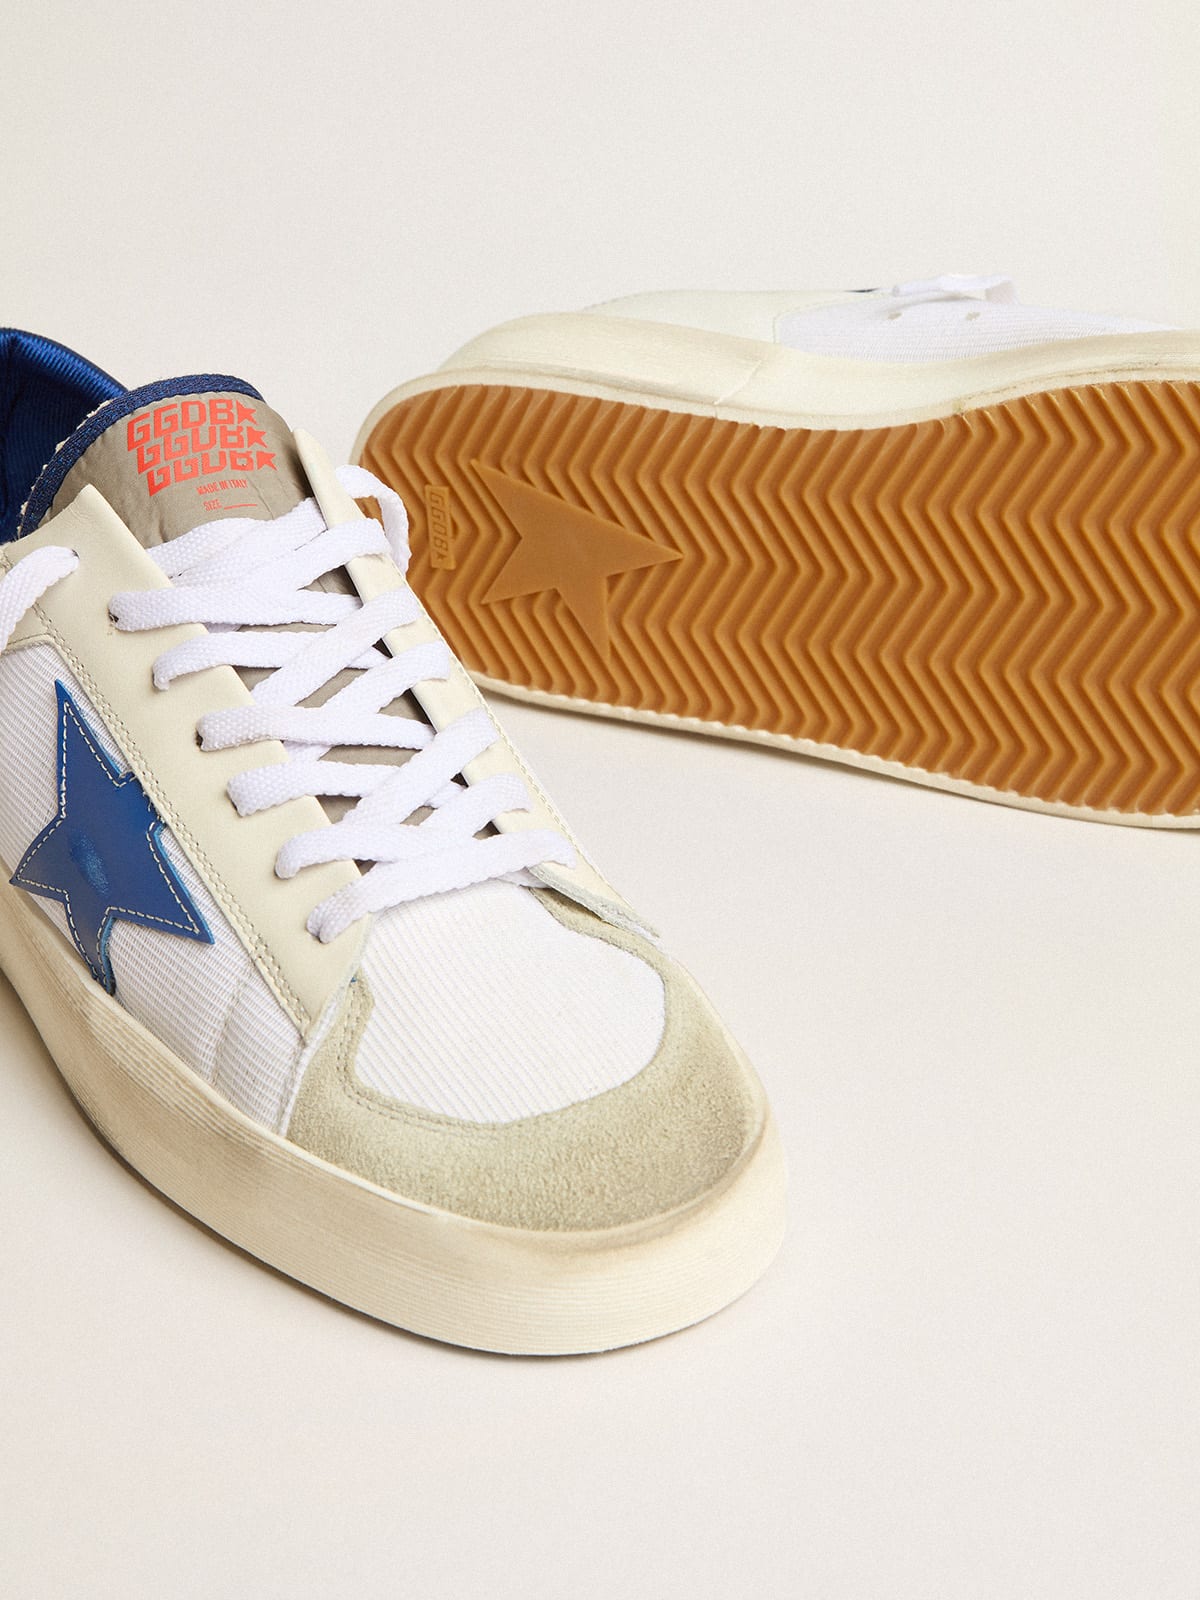 Stardan LTD in white mesh and leather with blue star and white heel tab |  Golden Goose